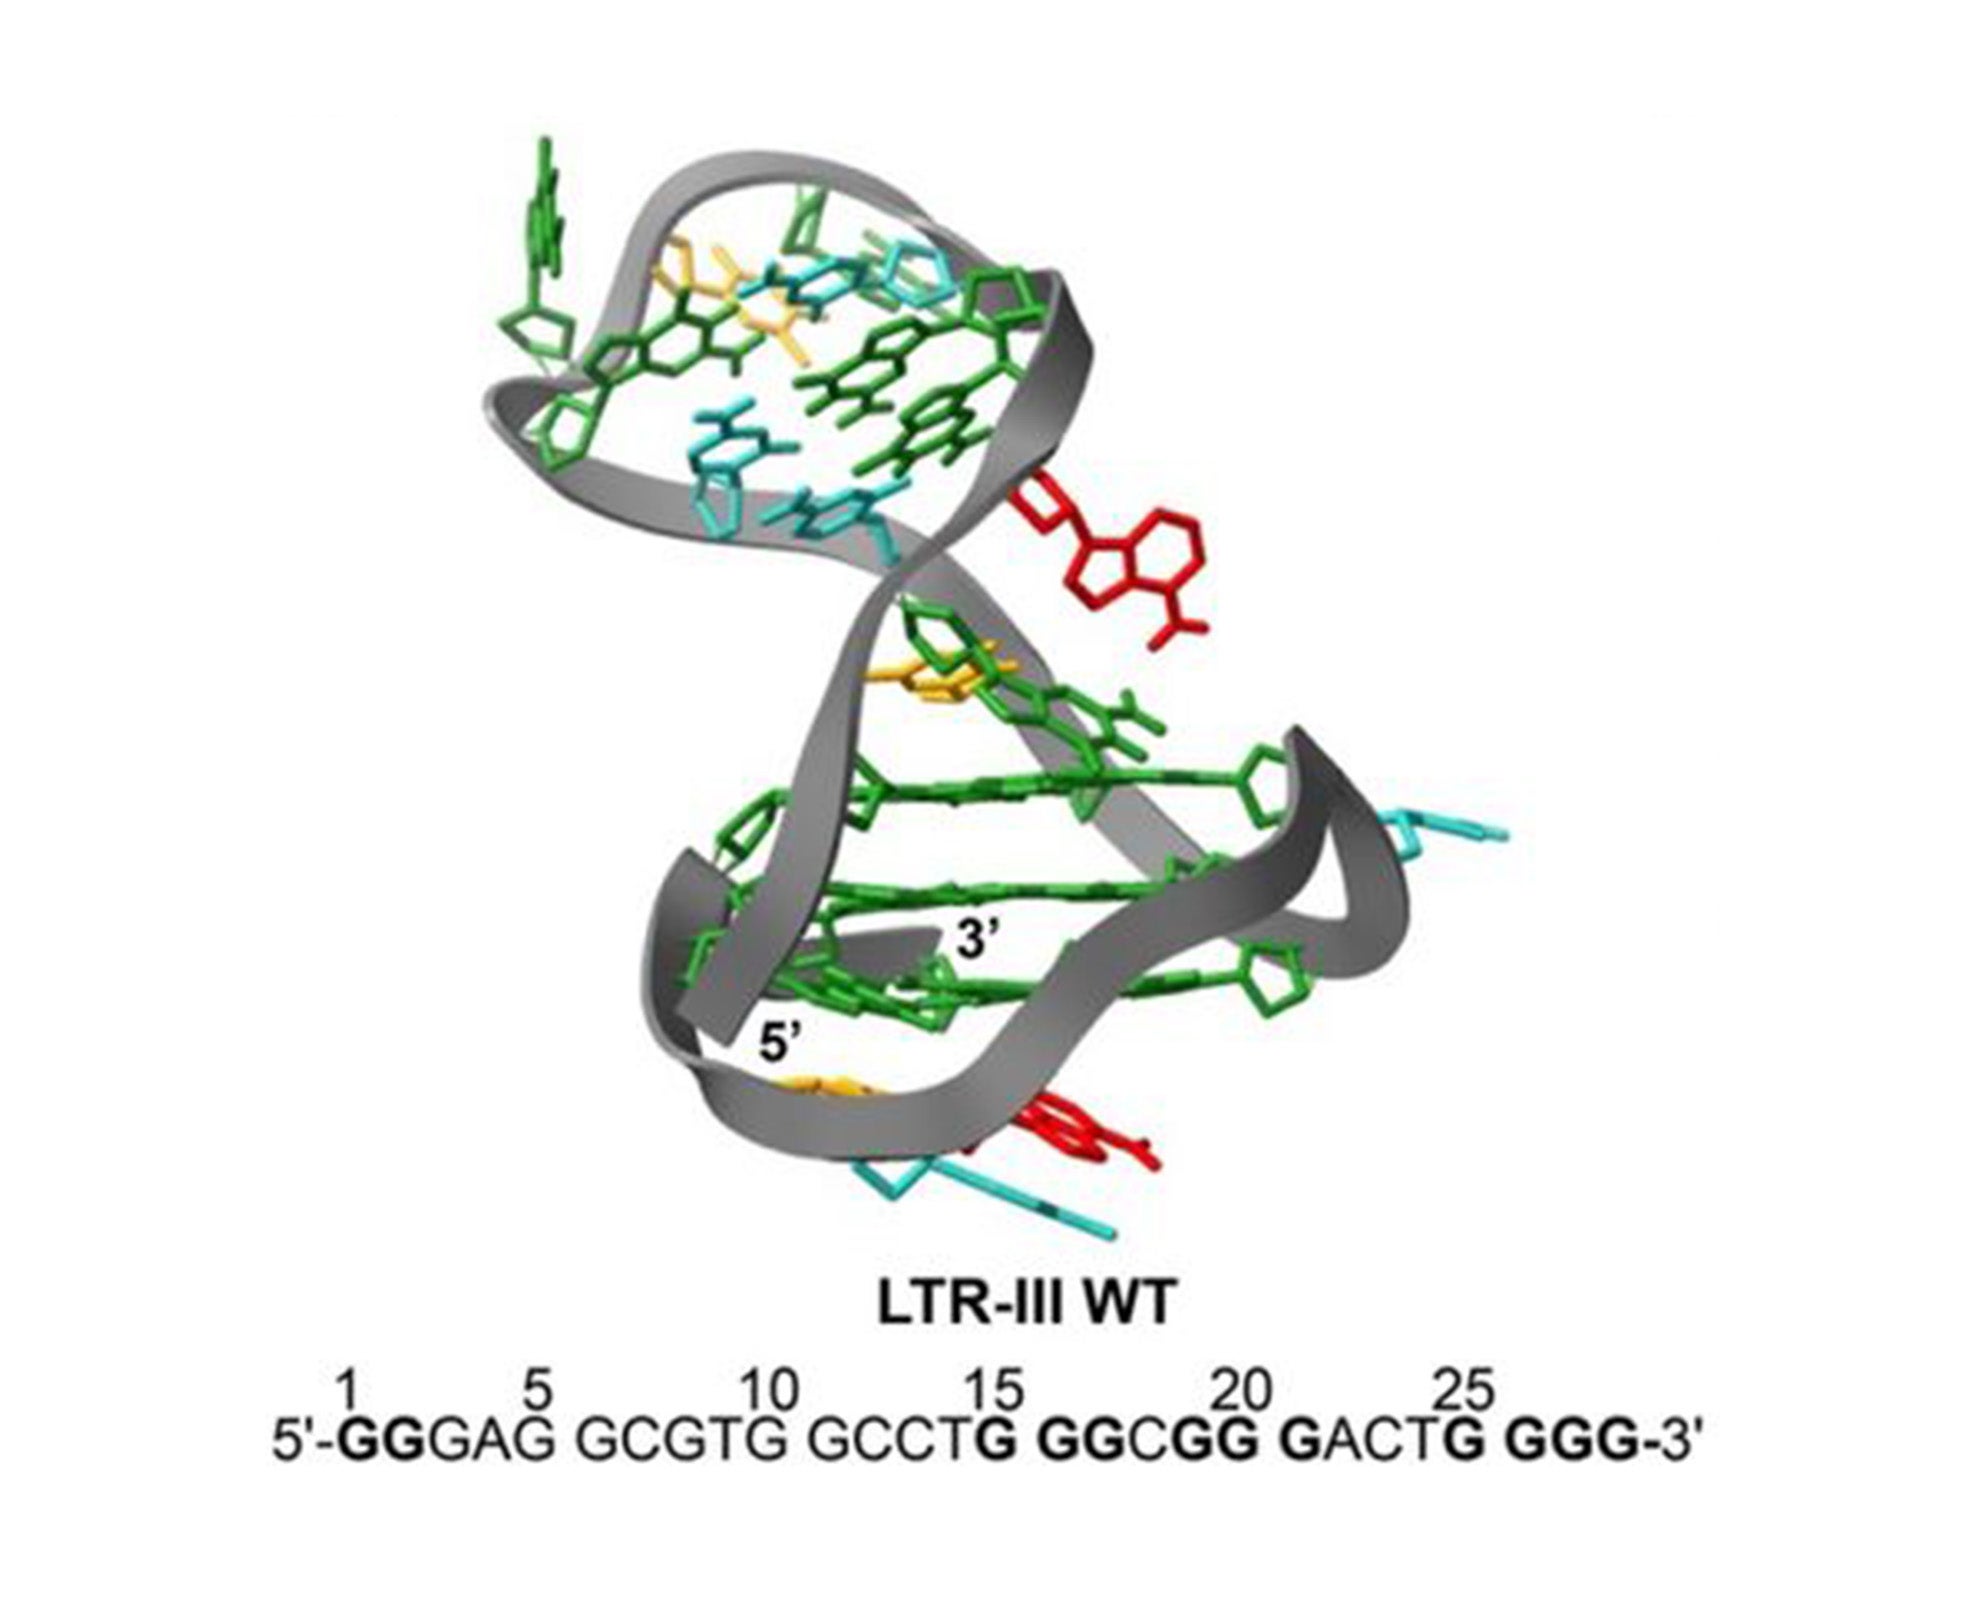 Protein structure and sequence illustration